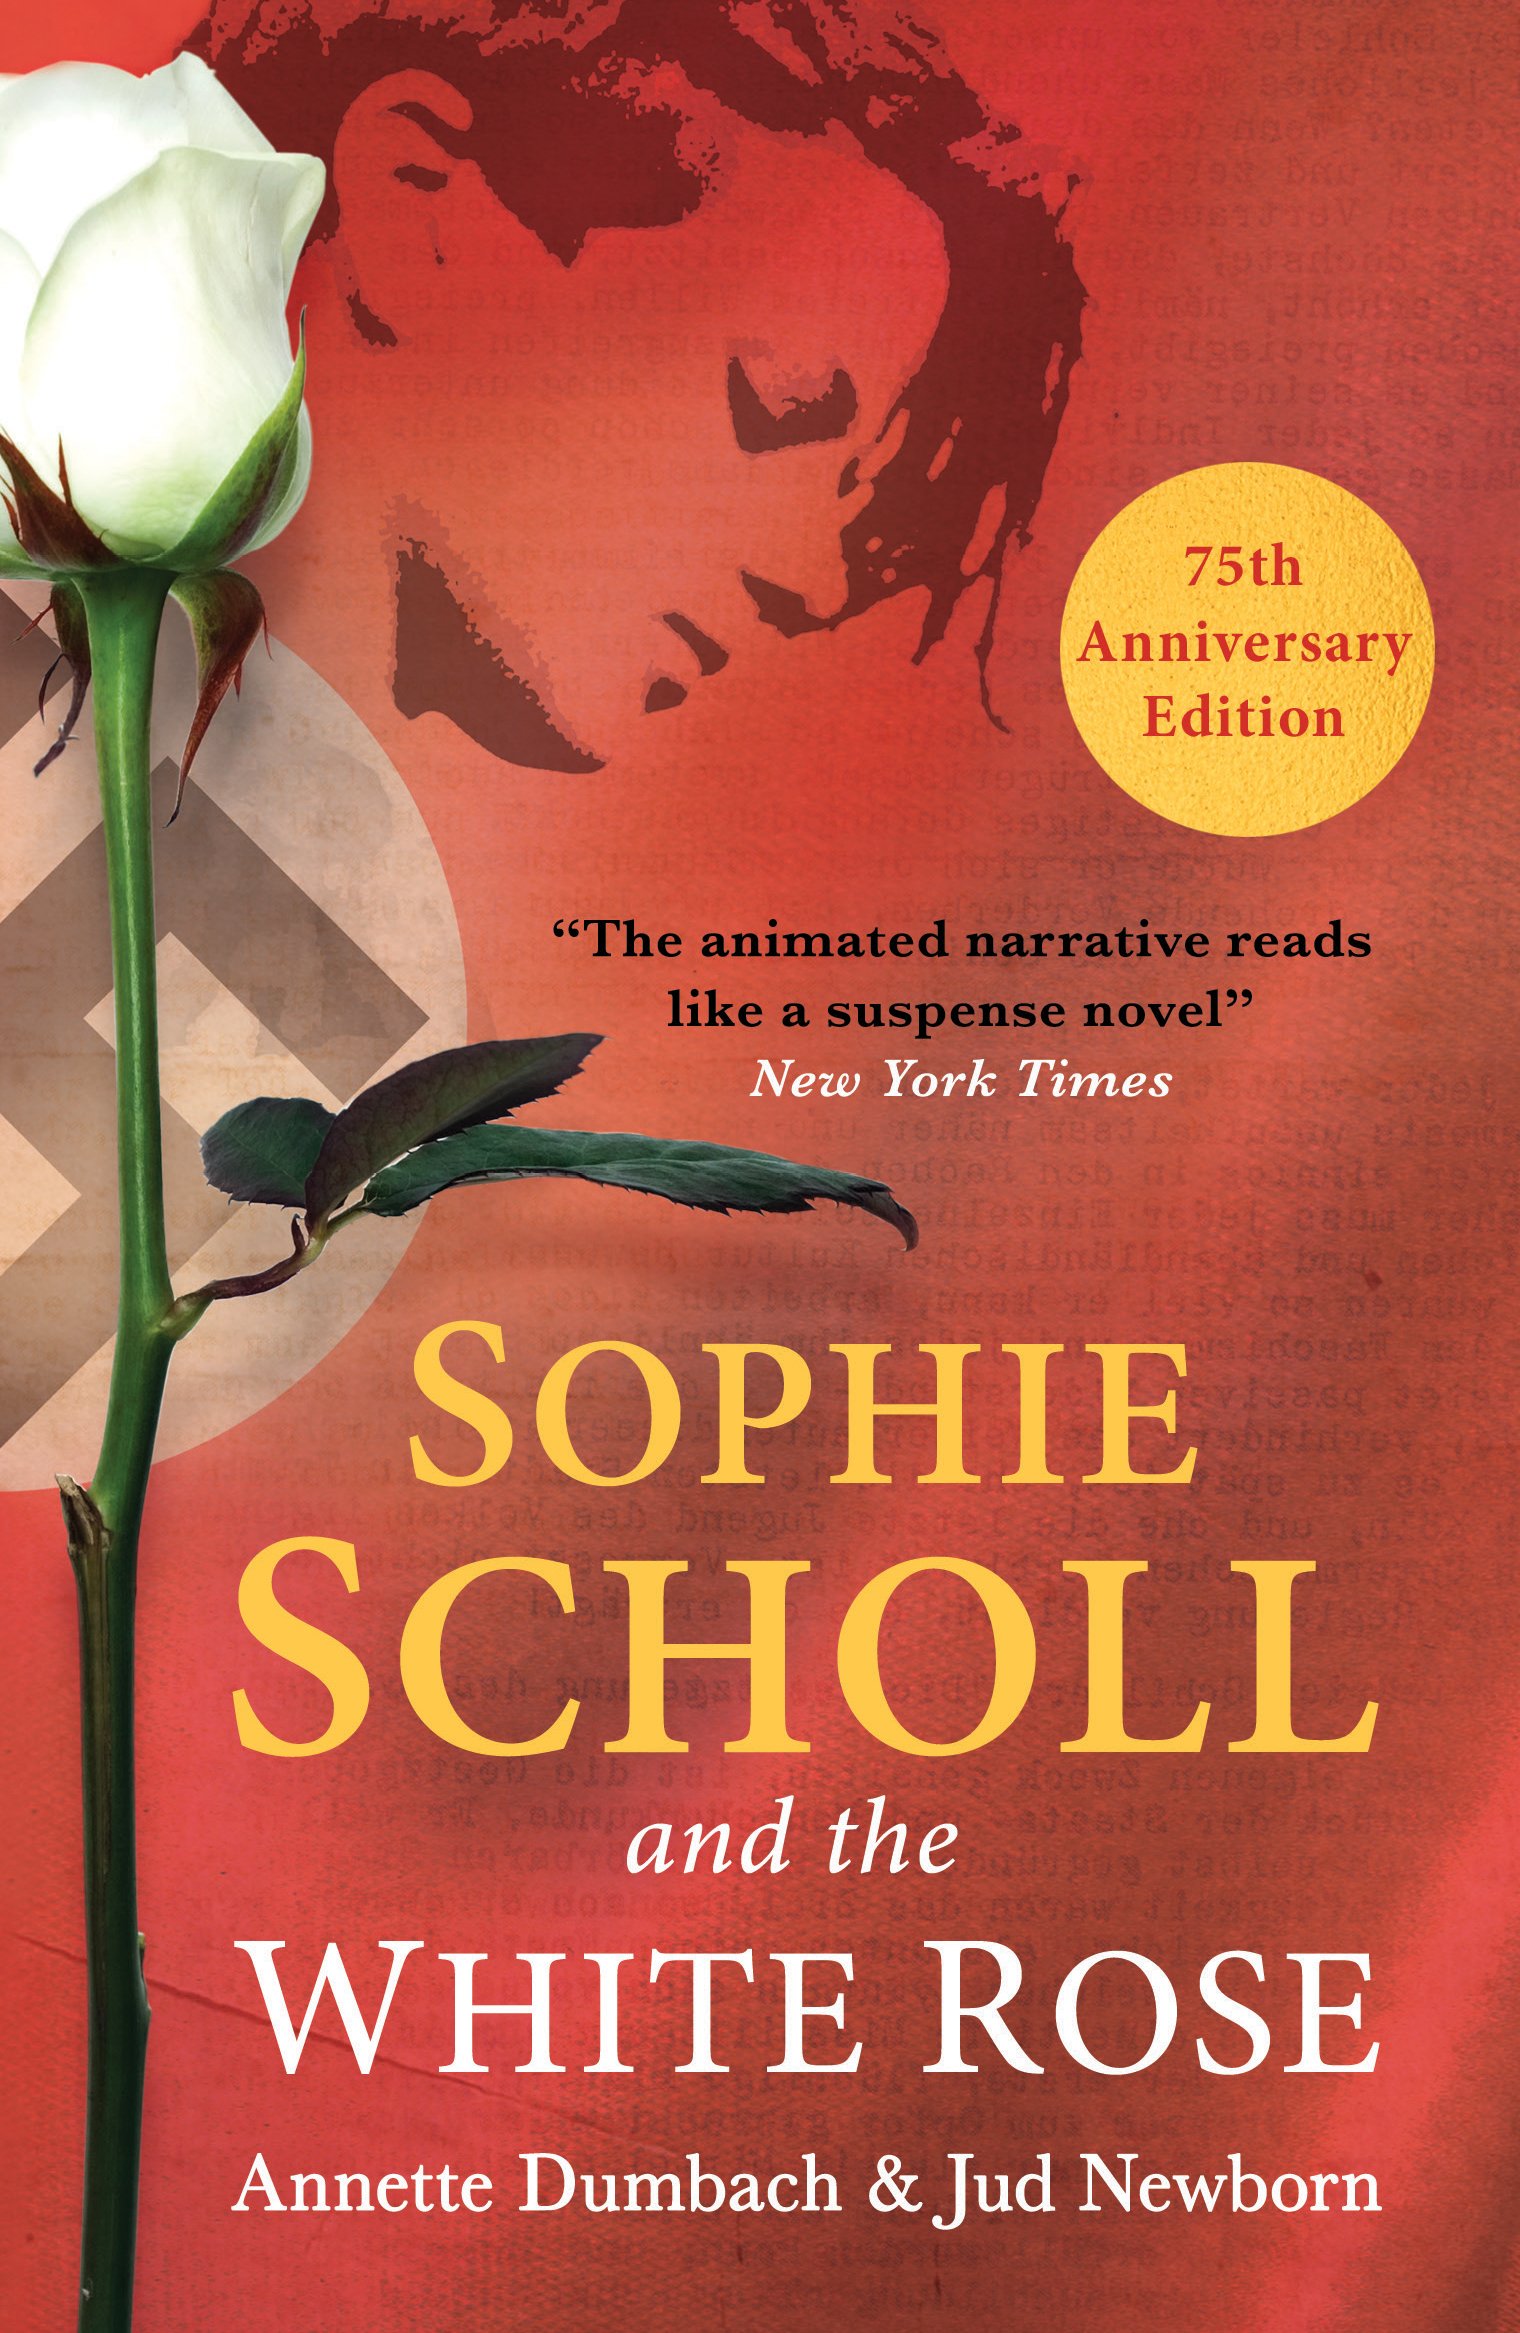 Sophie Scholl and the White Rose | Annette Dumbach, Jud Newborn